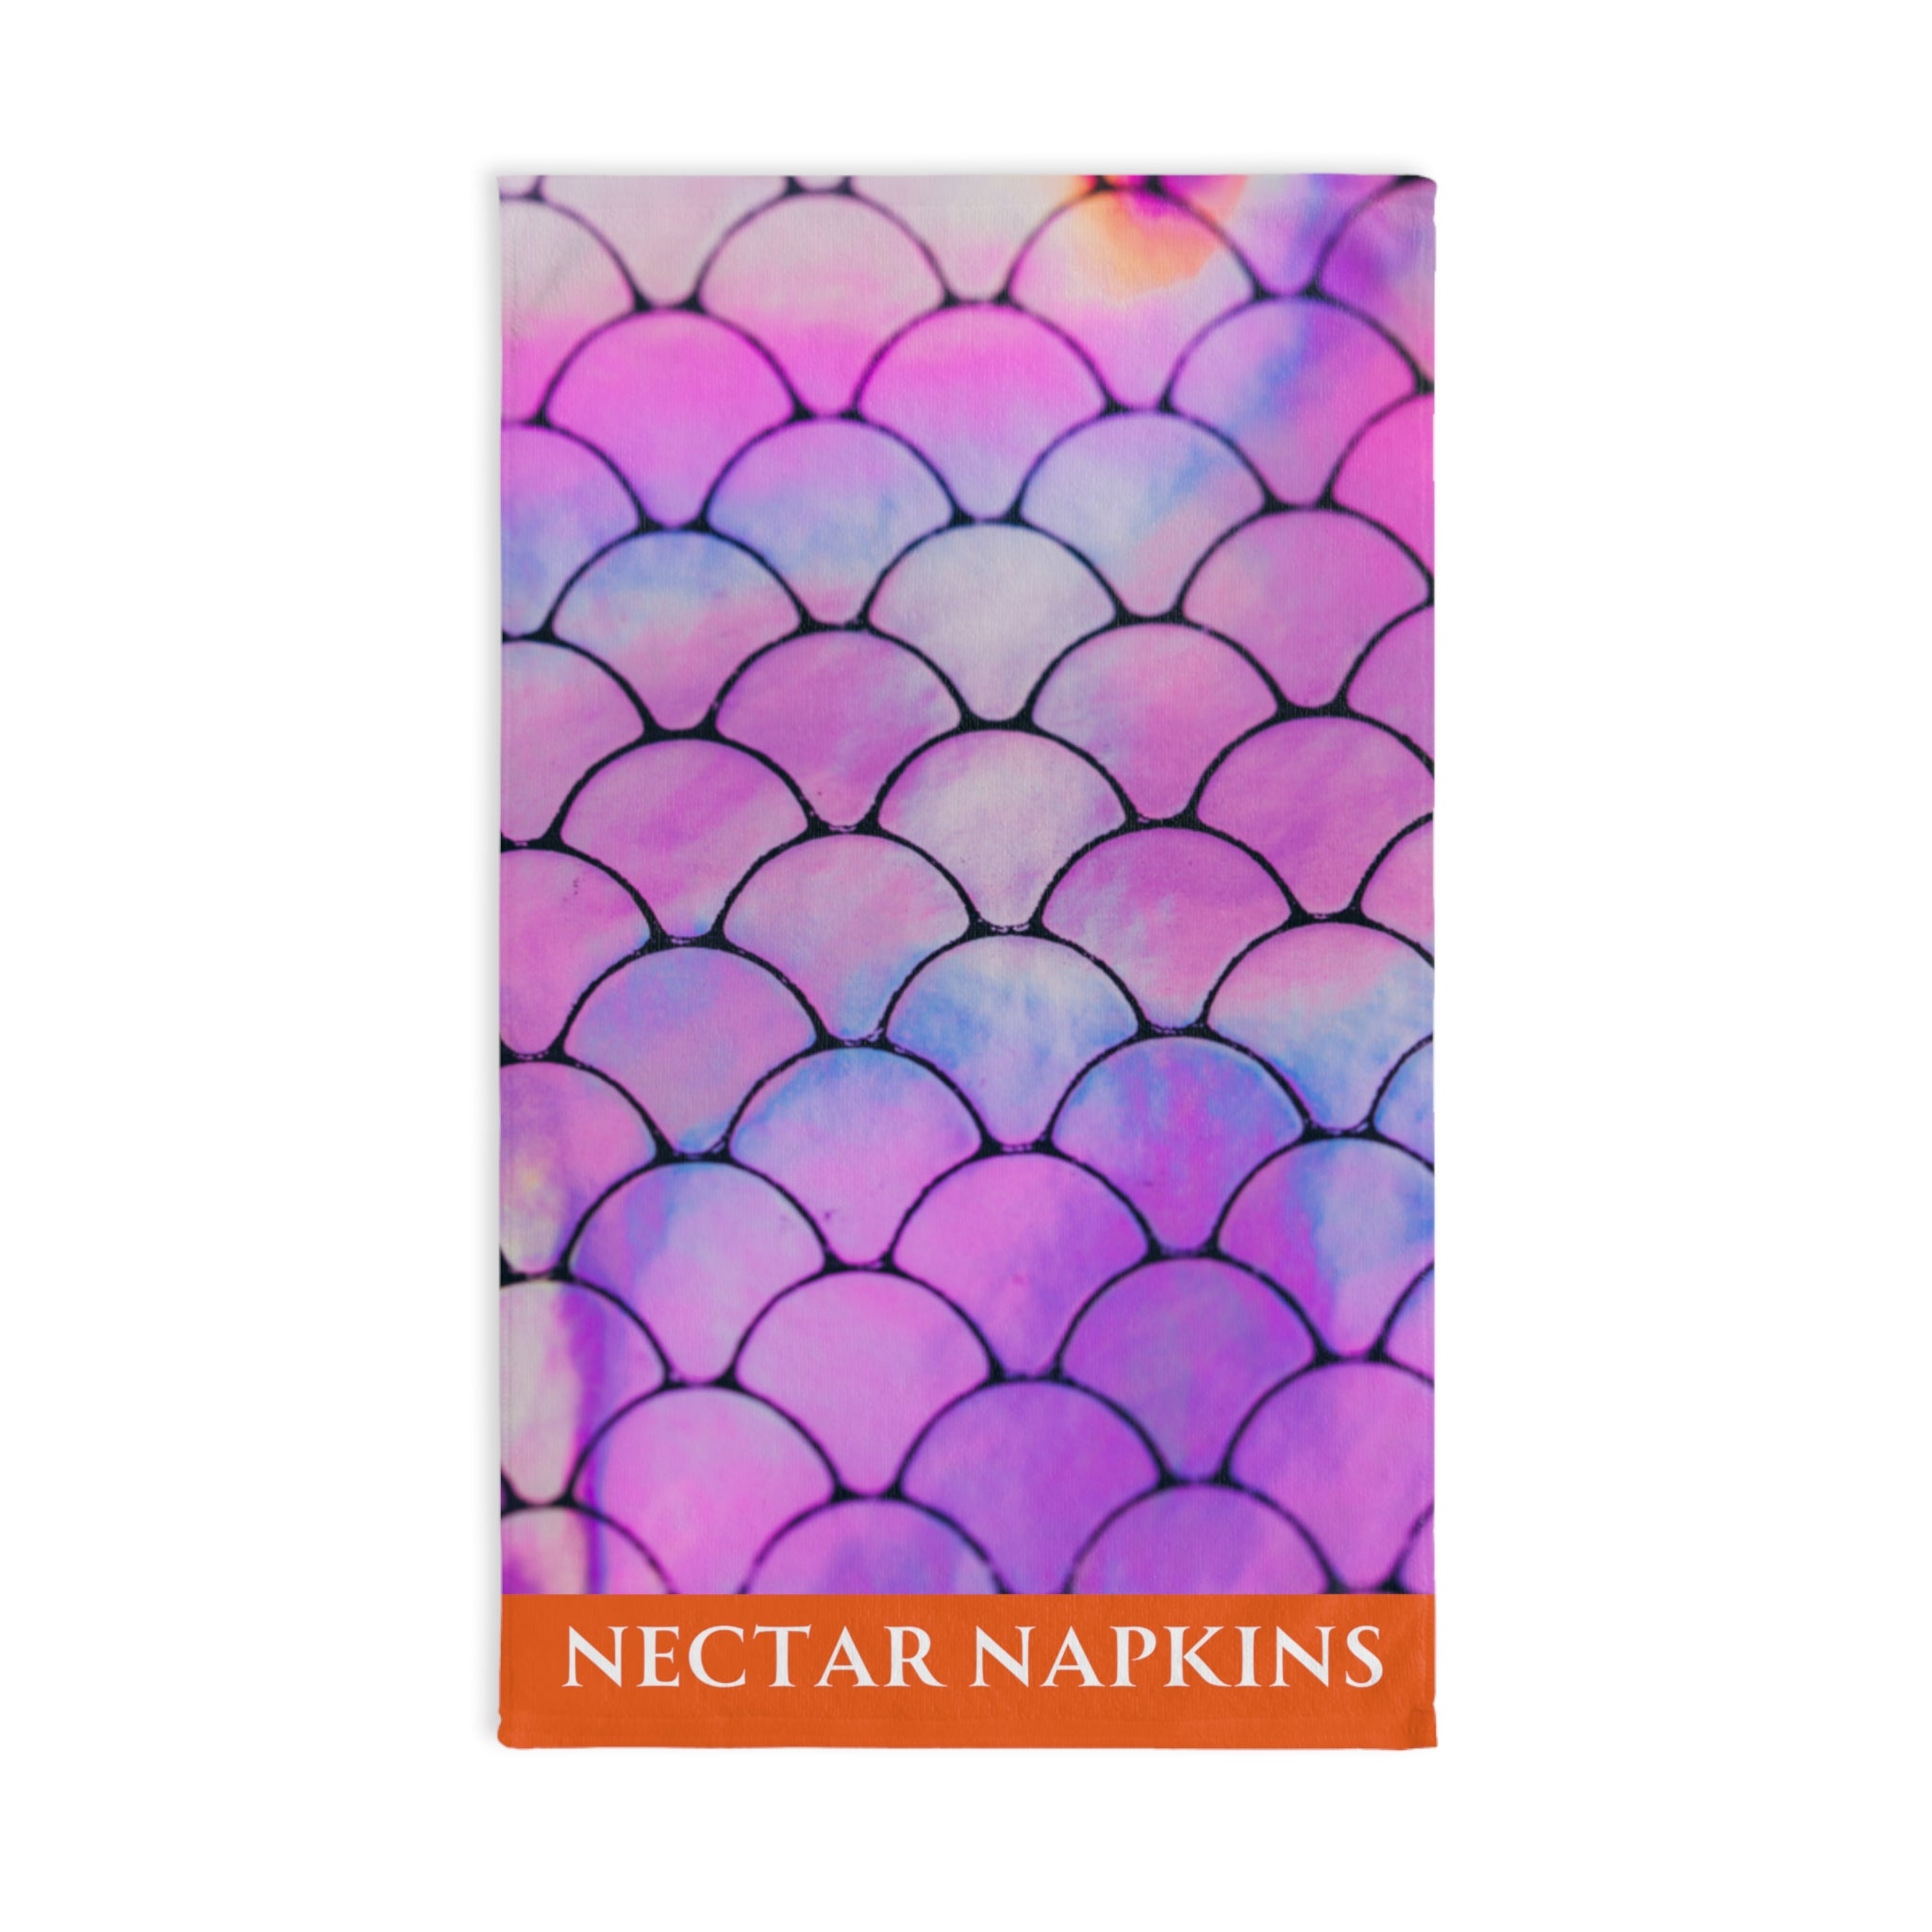 Mermaid Tail Purple Orange | Funny Gifts for Men - Gifts for Him - Birthday Gifts for Men, Him, Husband, Boyfriend, New Couple Gifts, Fathers & Valentines Day Gifts, Hand Towels NECTAR NAPKINS